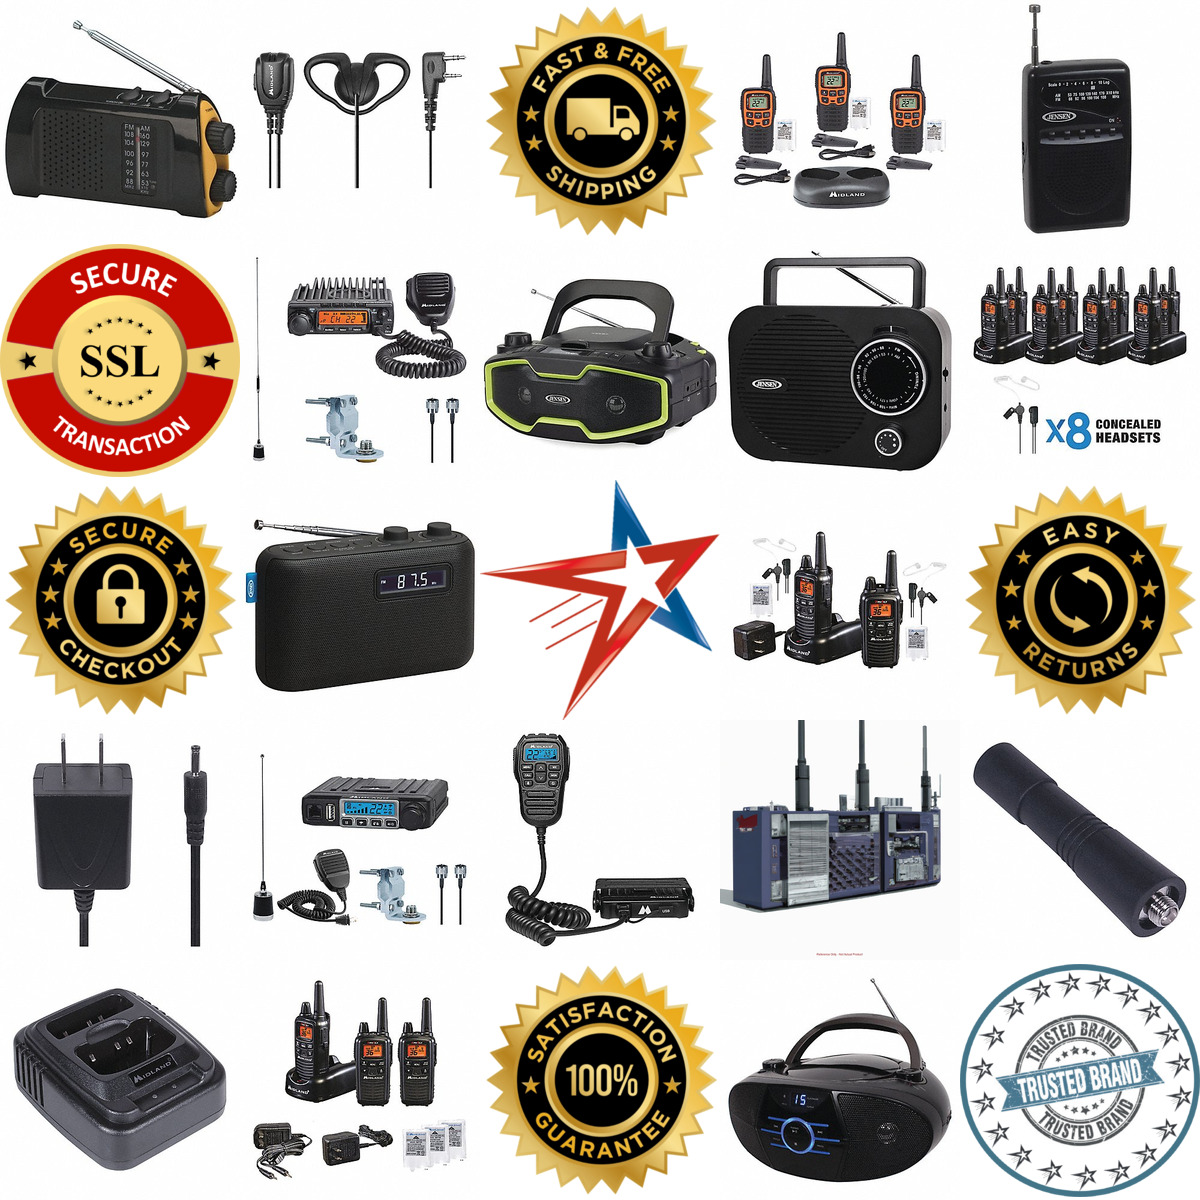 A selection of Radios products on GoVets